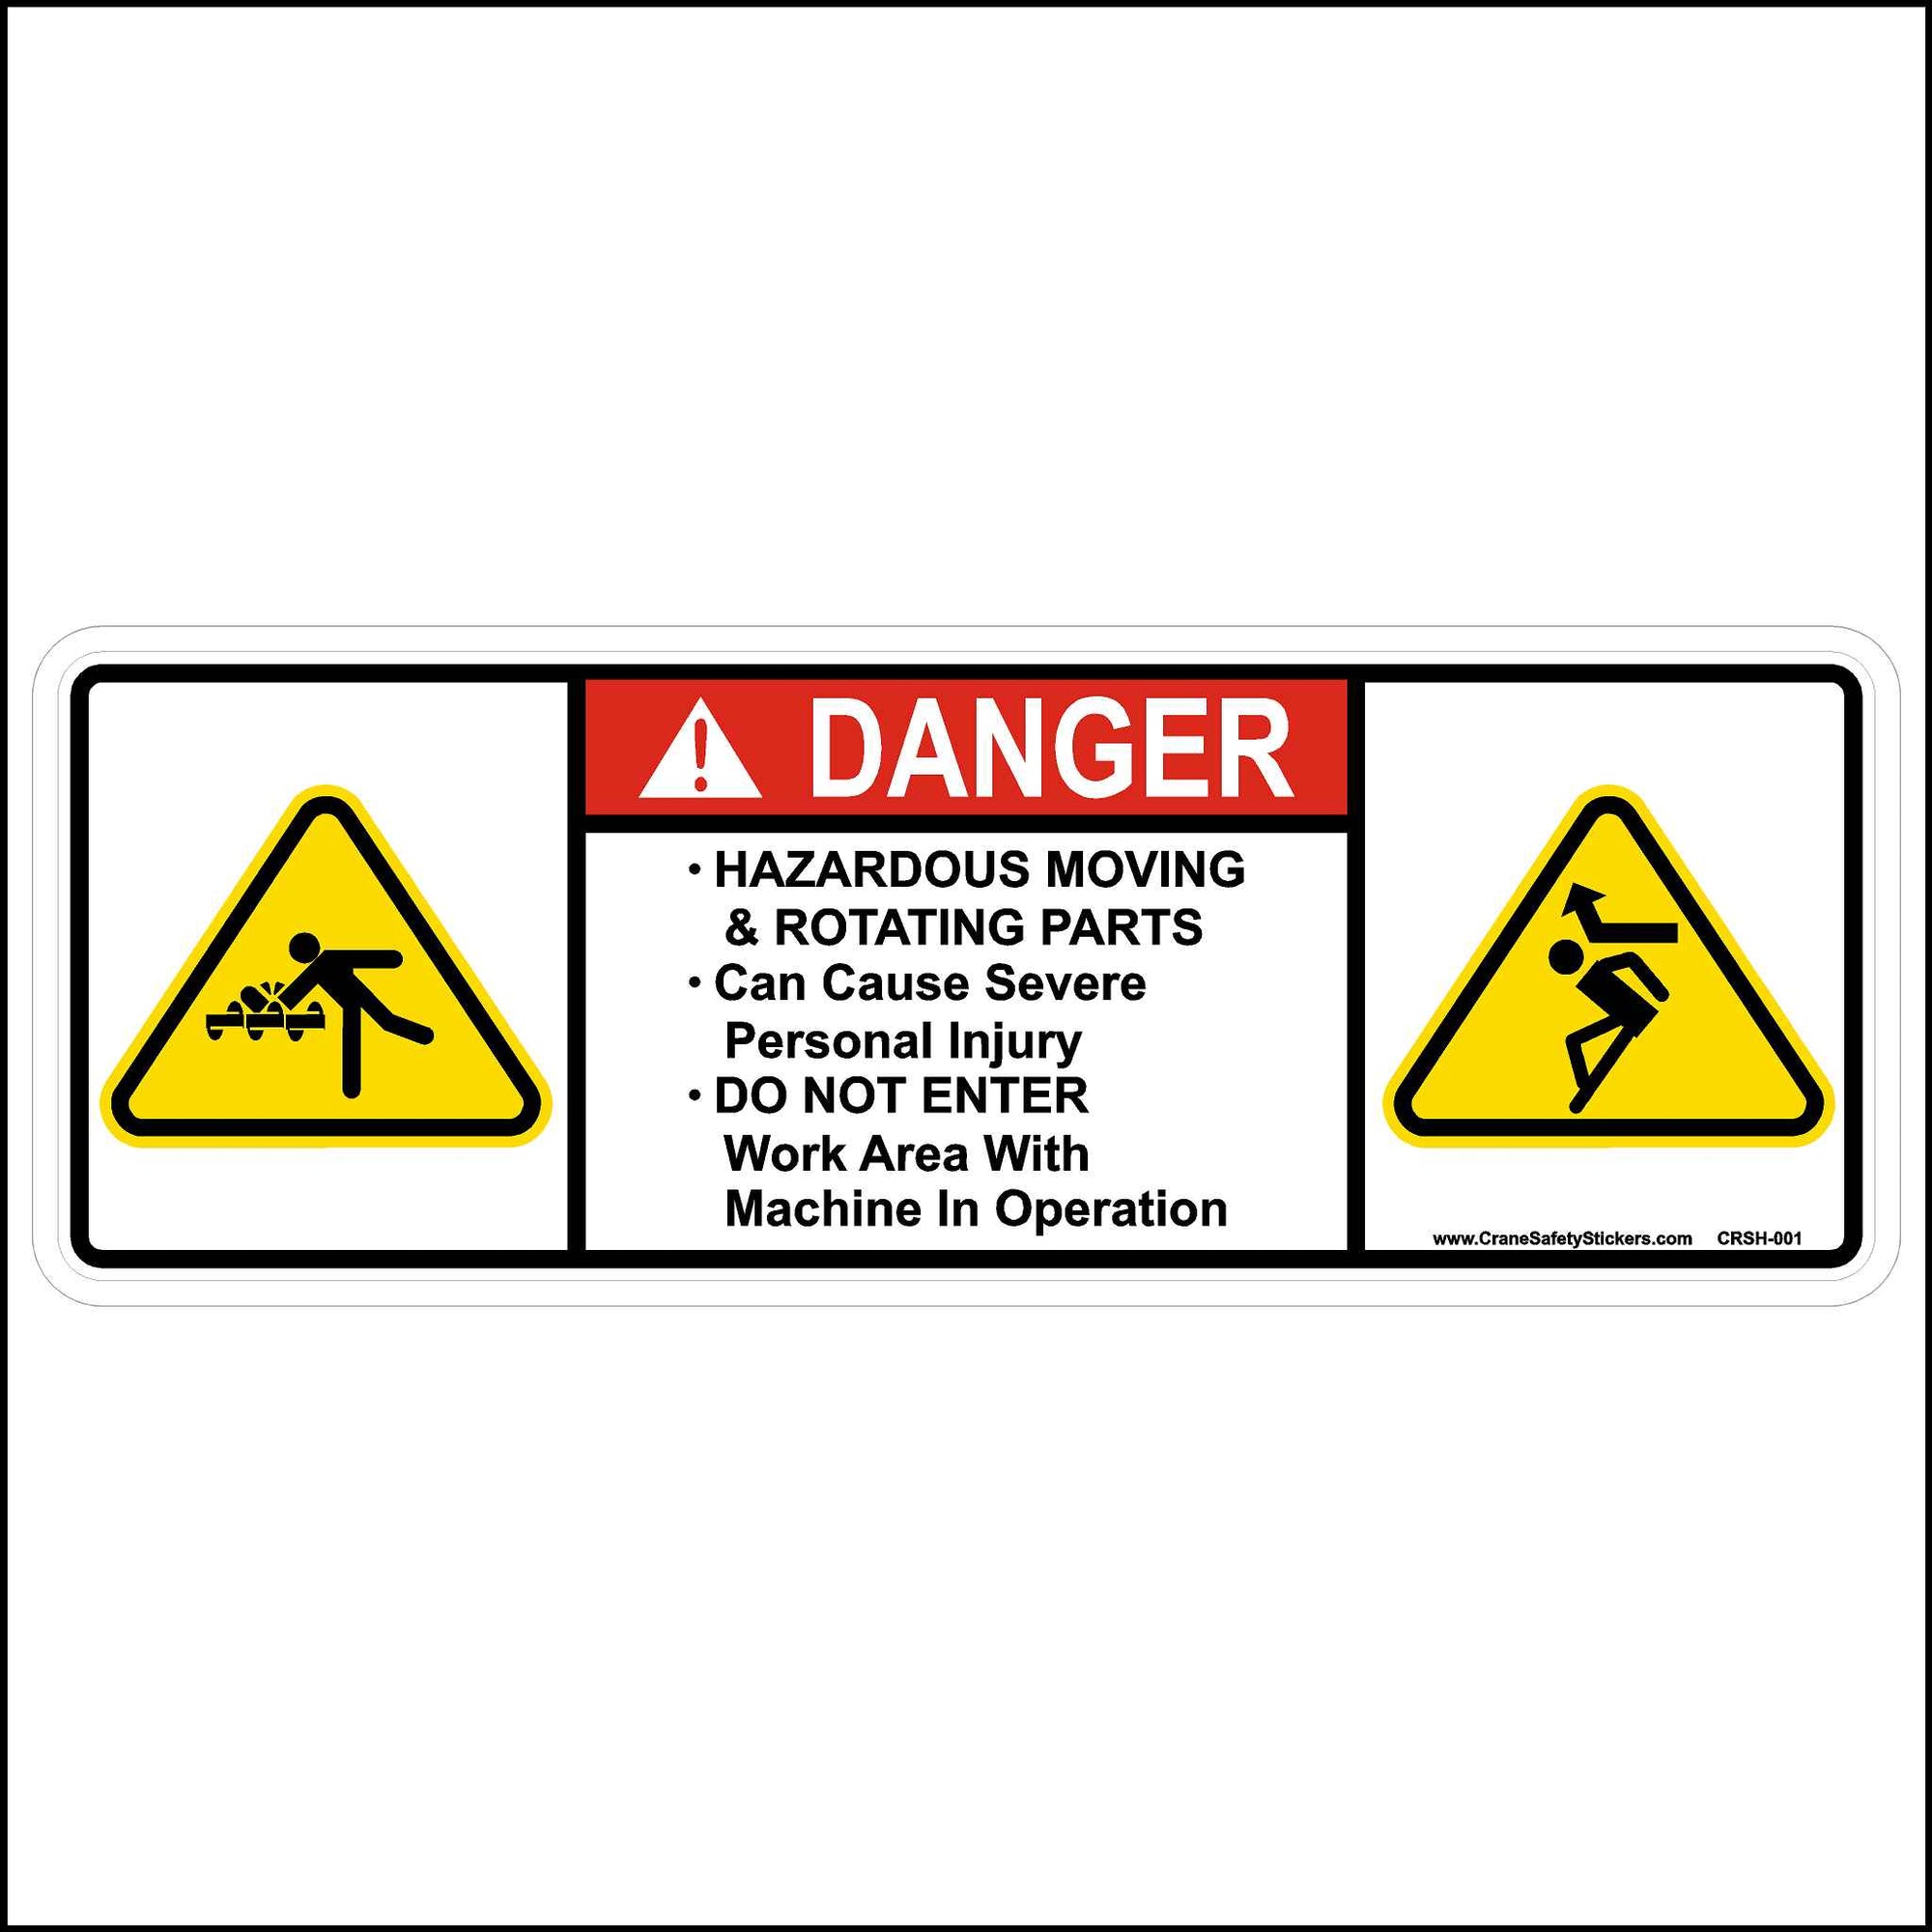 Safety Sticker Printed With, DANGER, Hazardous Moving and Rotating Parts Can Cause Severe Personal Injury. Do Not Enter Work Area With Machine In Operation.